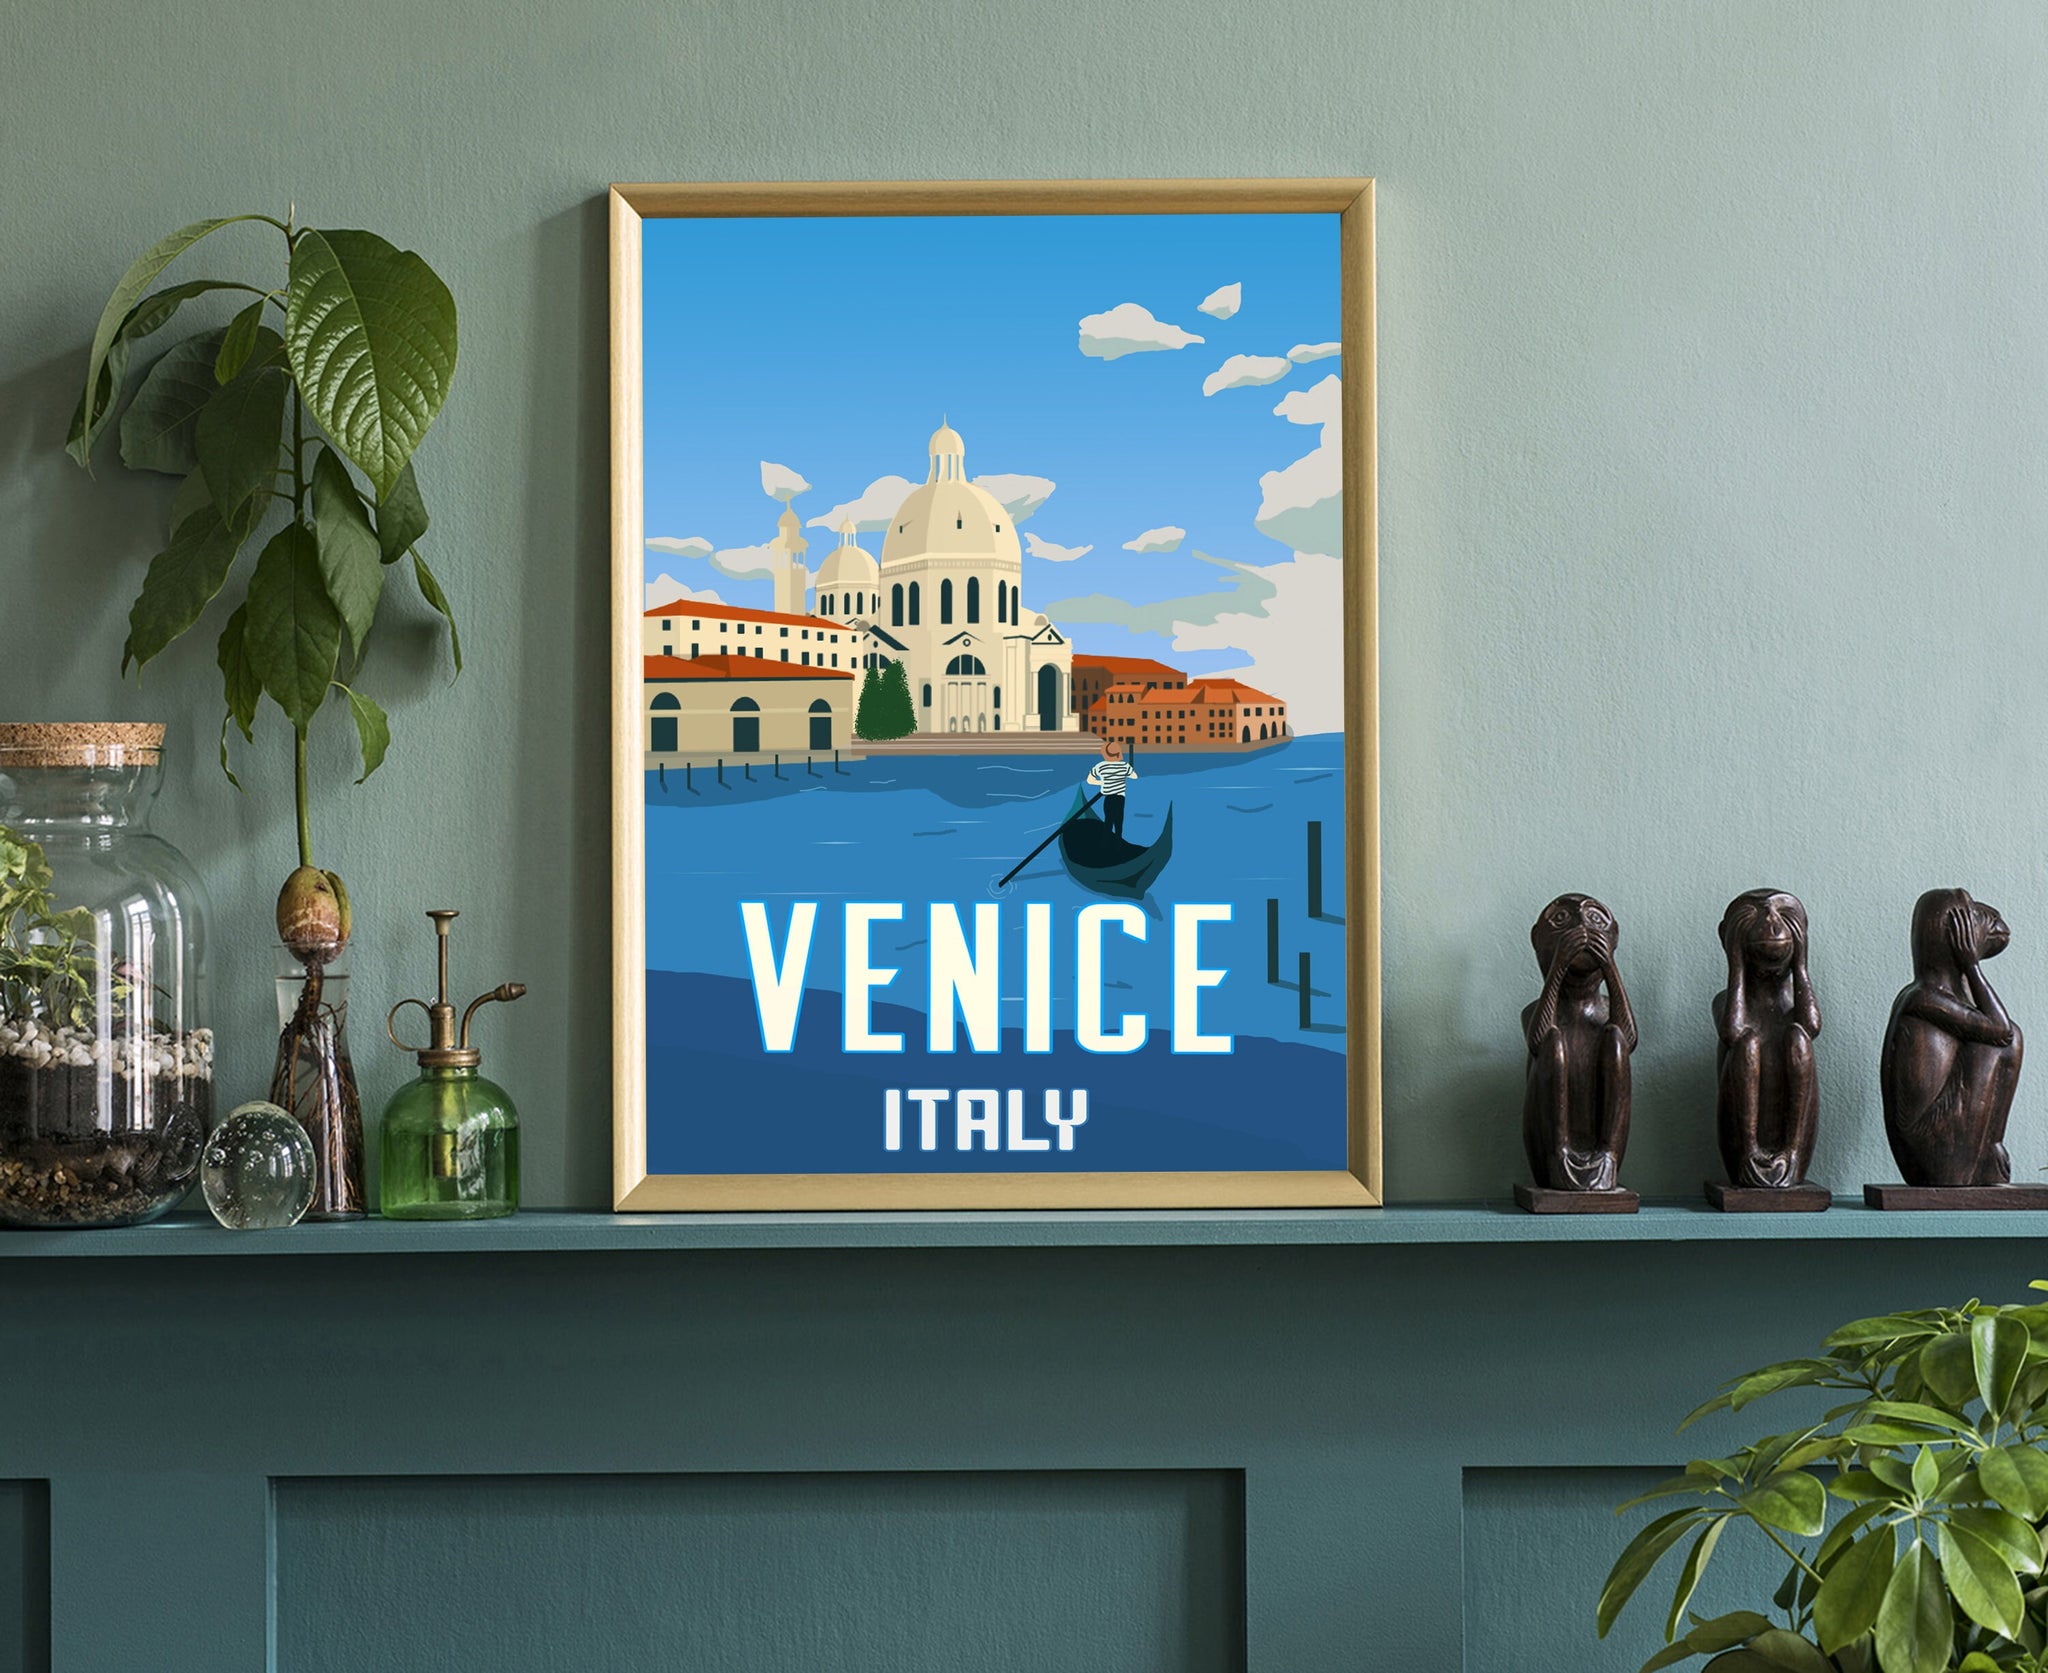 VENICE TRAVEL POSTER, Venice cityscape and landmark poster wall art, Home wall art, Office wall decoration, Italy Venice poster print